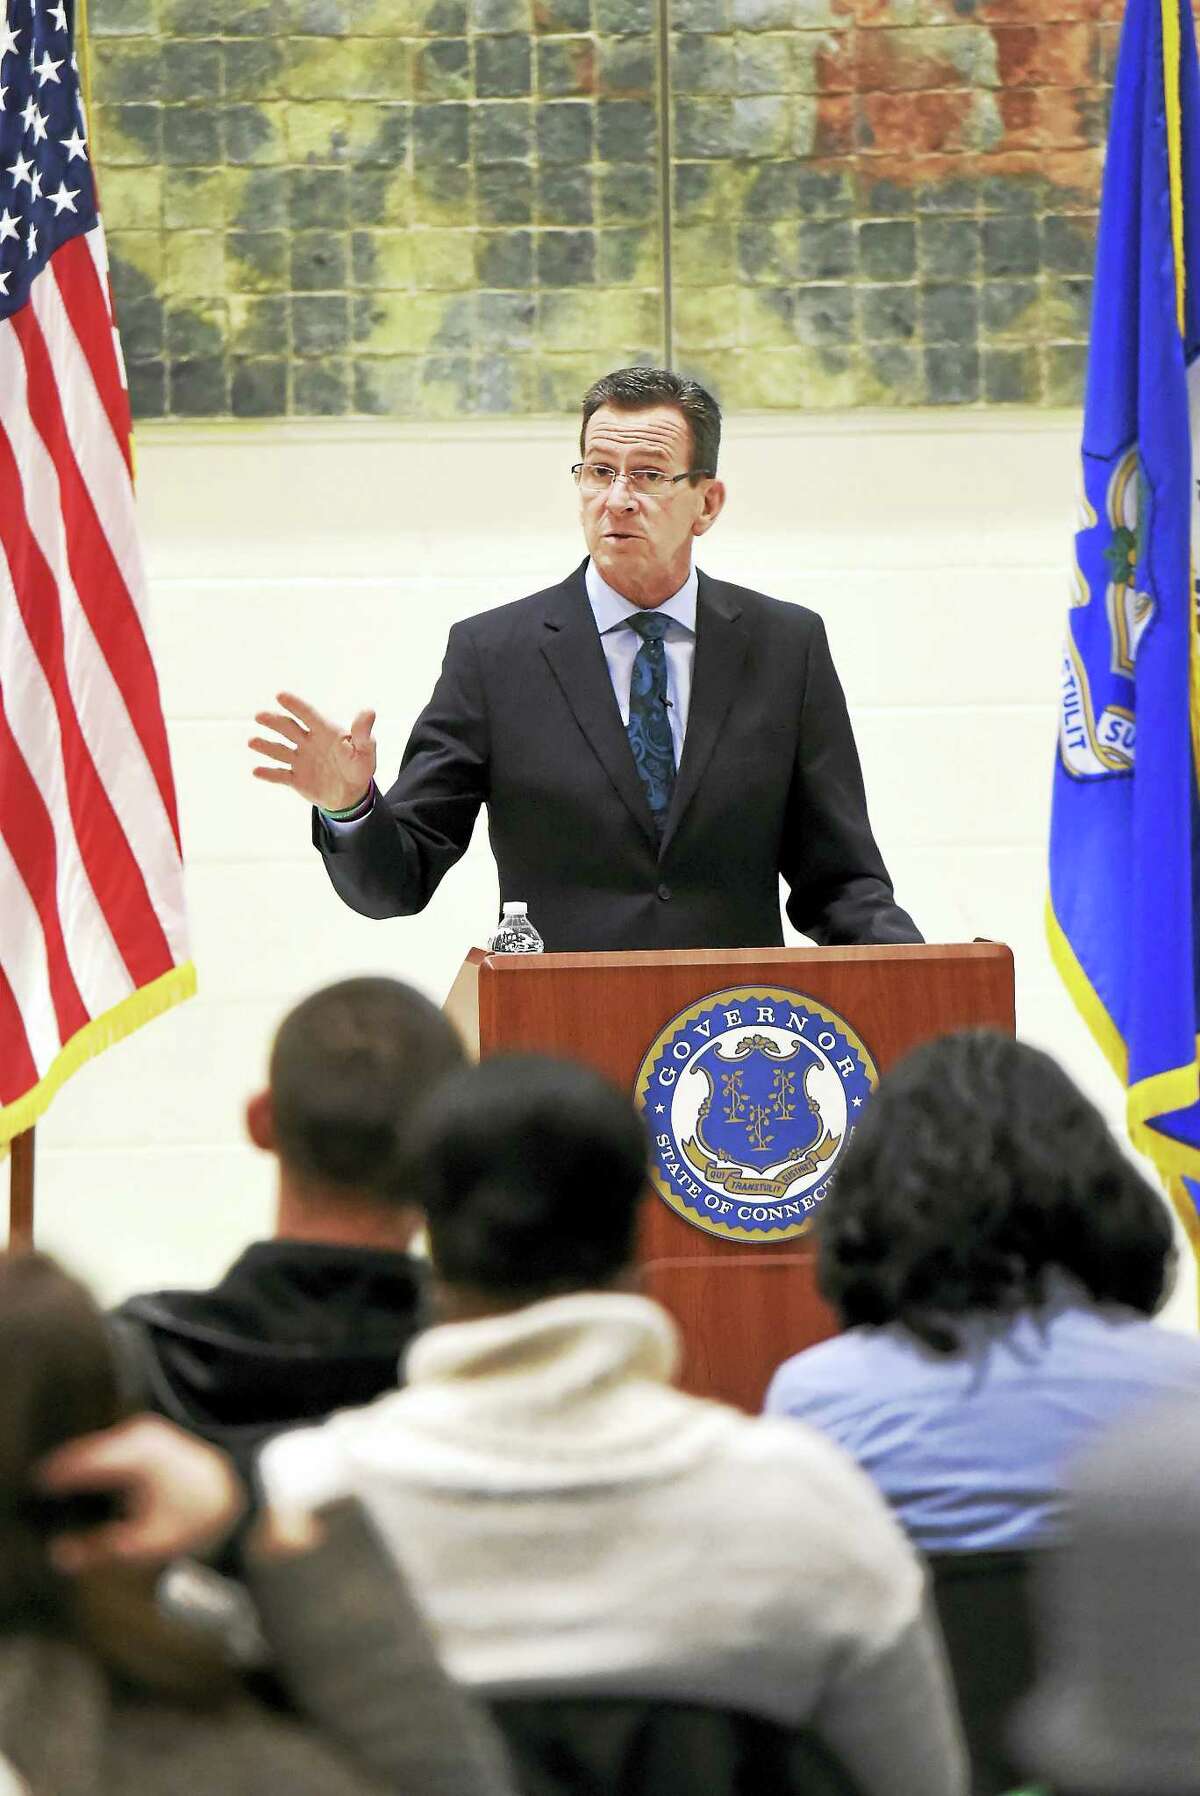 Gov. Dannel P. Malloy at a Town Hall Forum at Wilbur Cross High School in New Haven on Feb. 23.